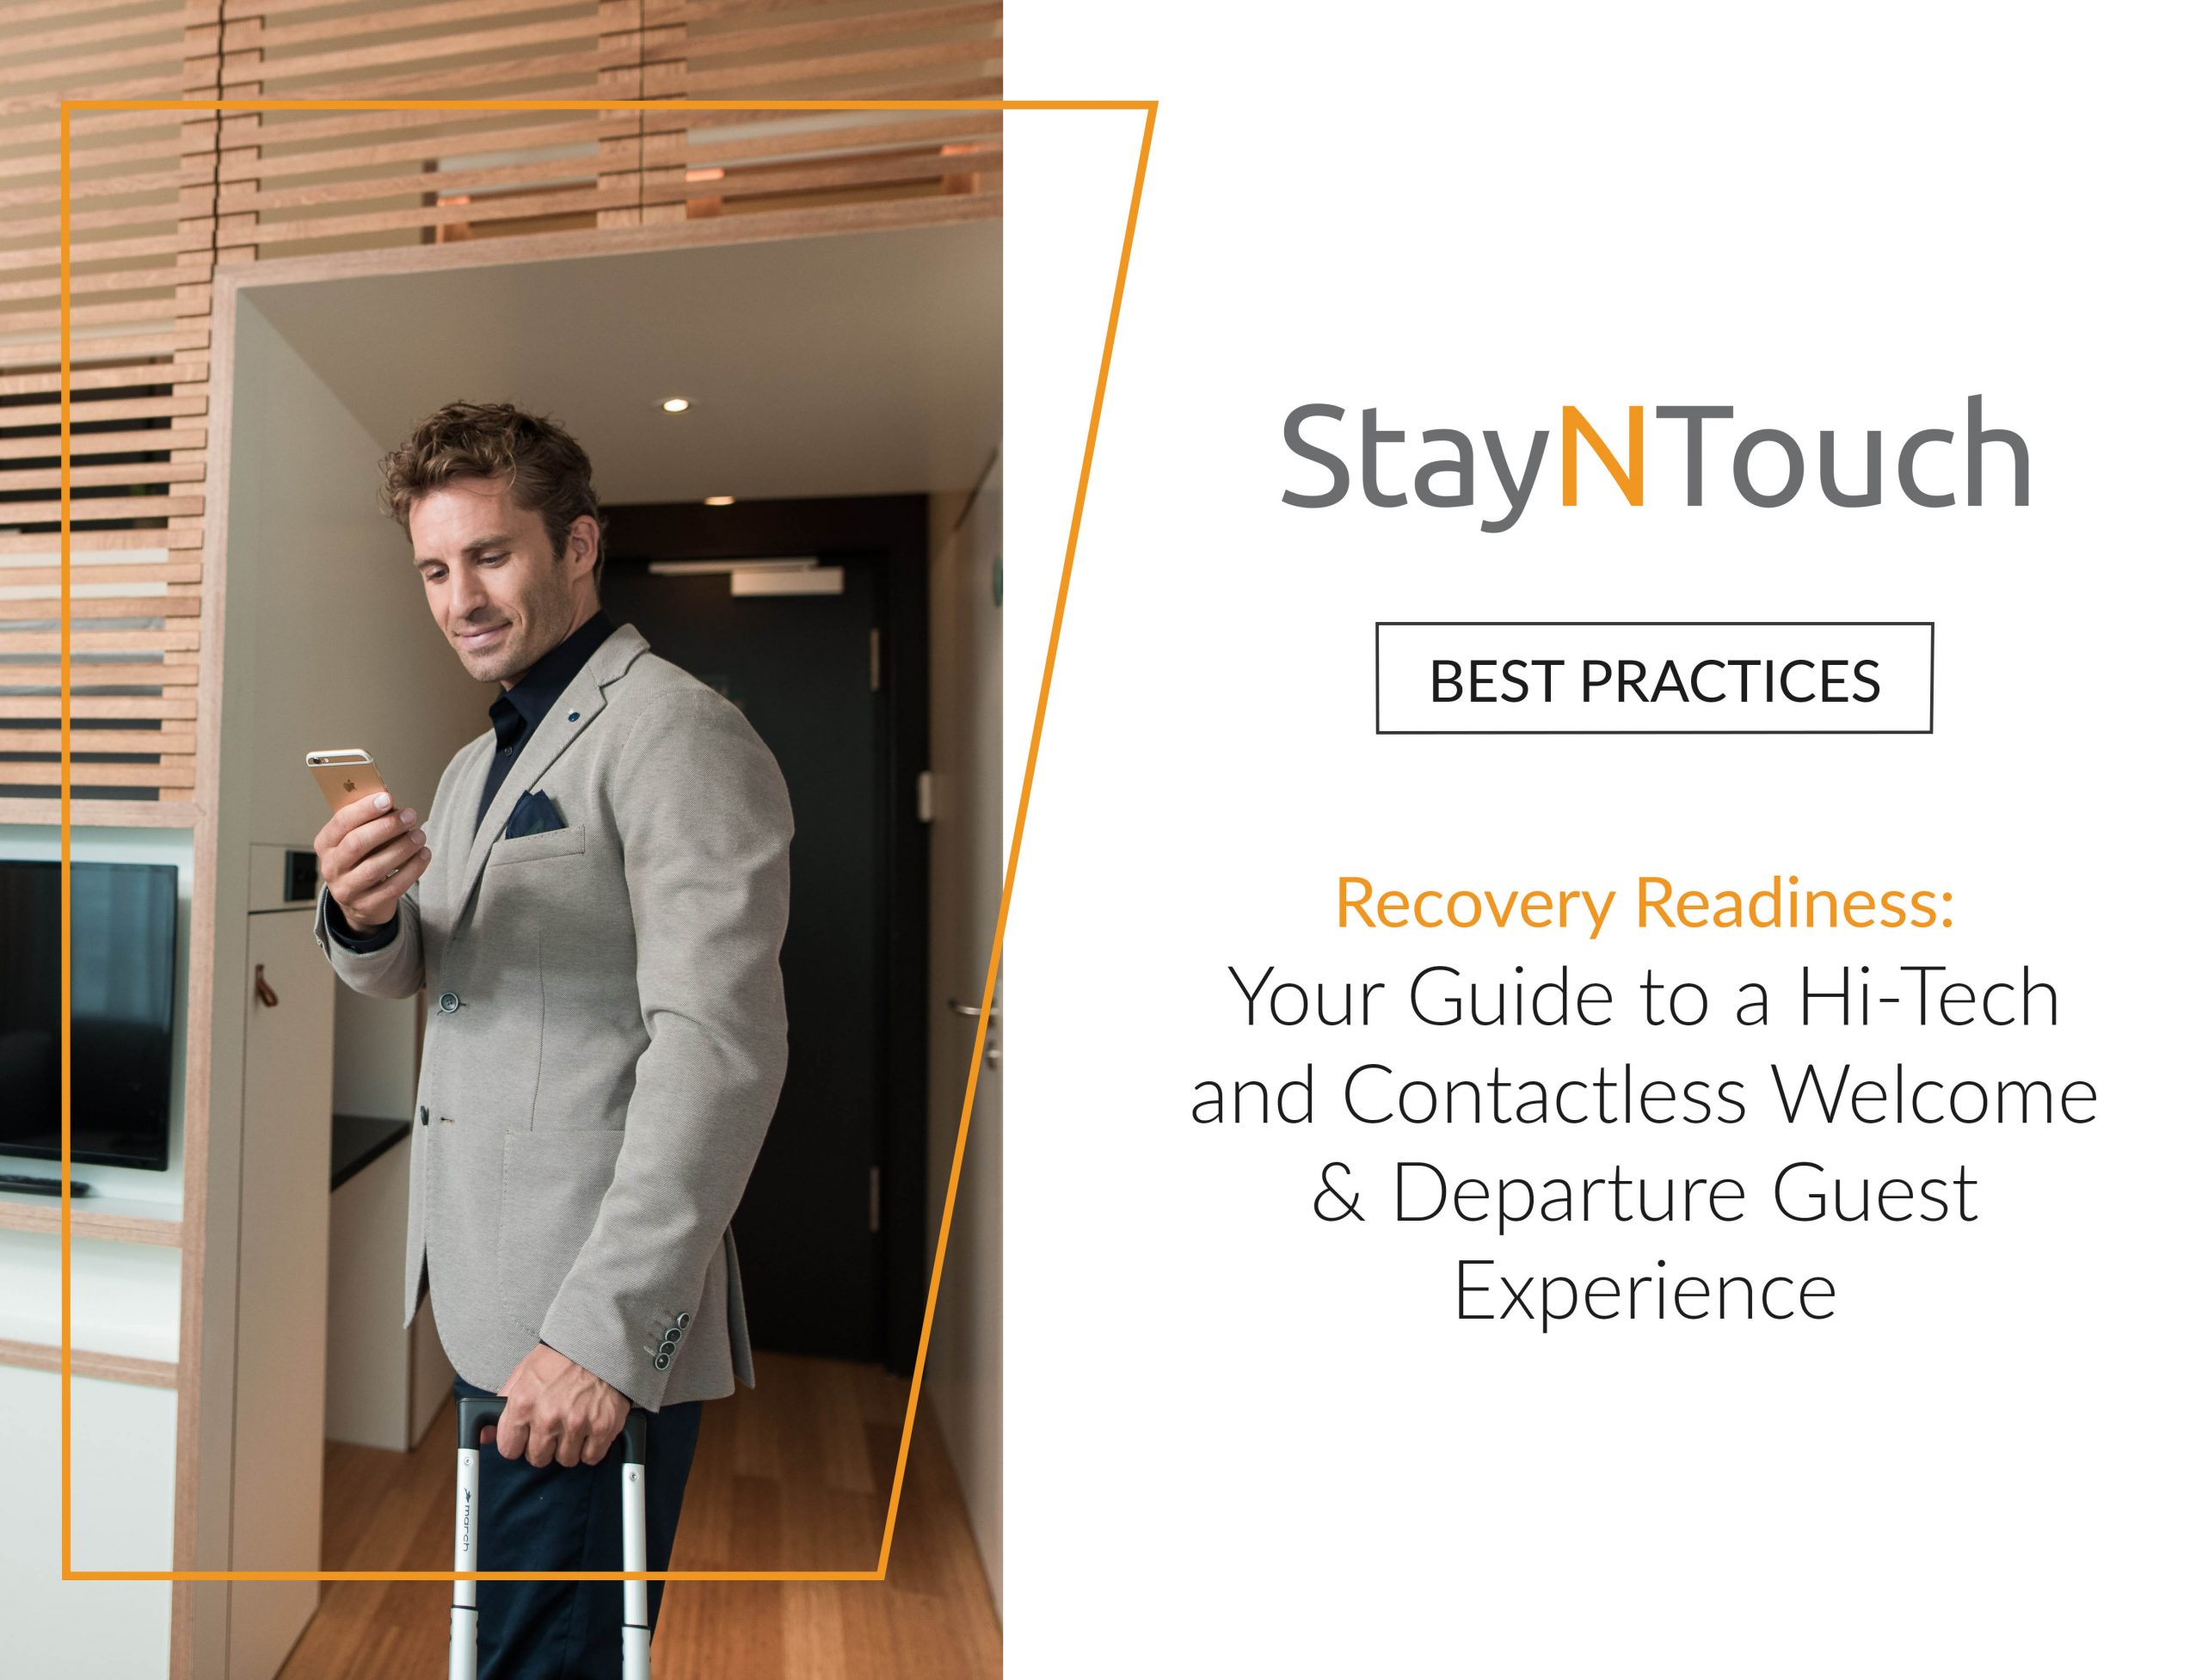 StayNTouch Best Practices Recovery Readiness: Your Guide to a Hi-Tech and Contactless Welcome & Departure Guest Experience